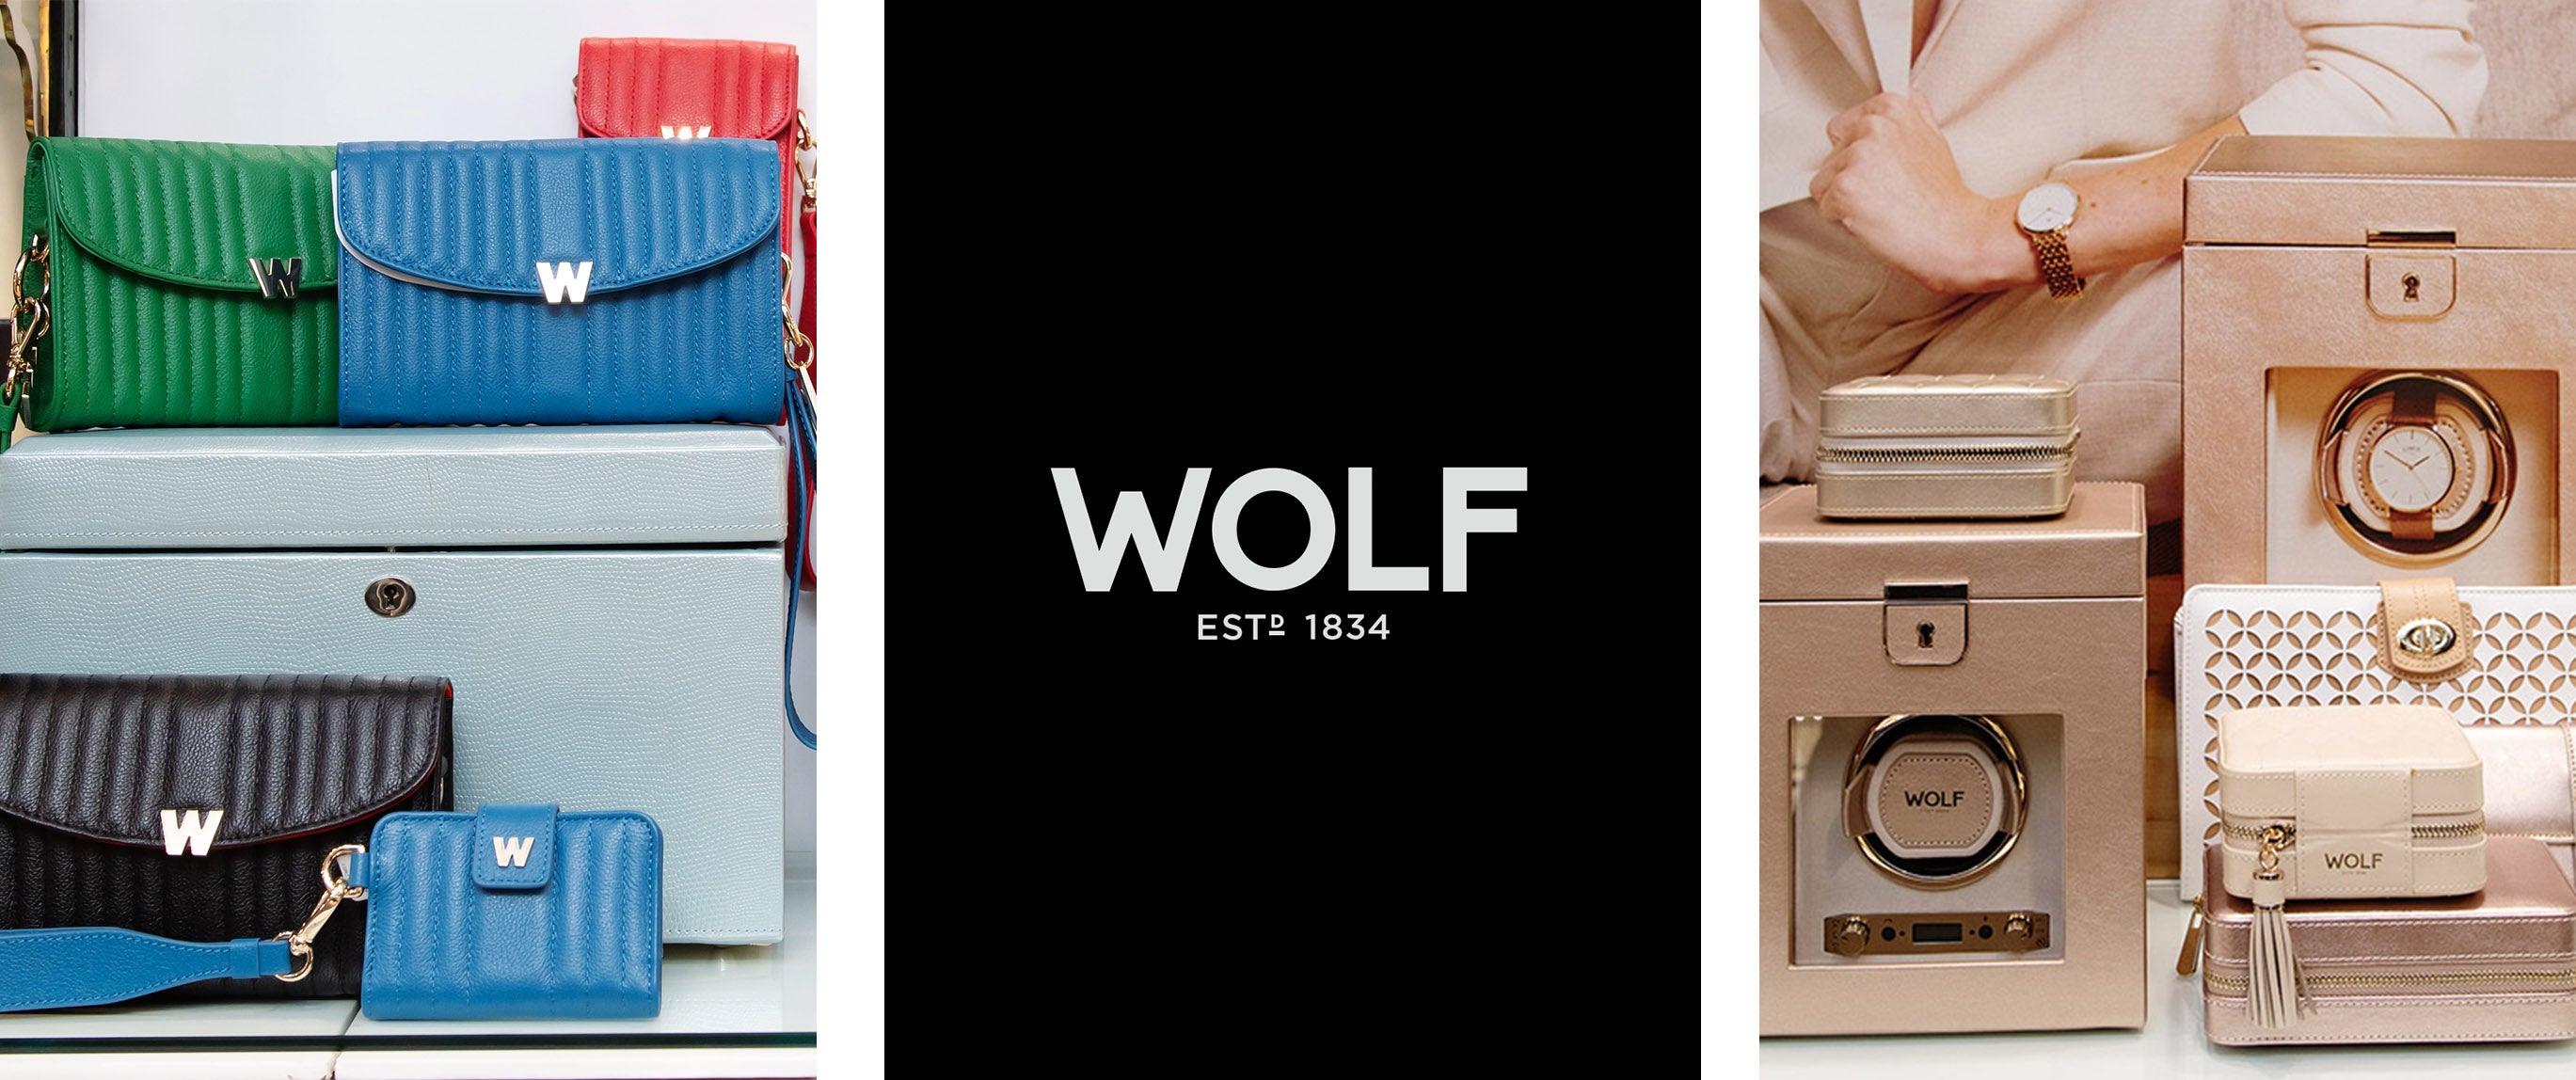 wolf accessories at deacons